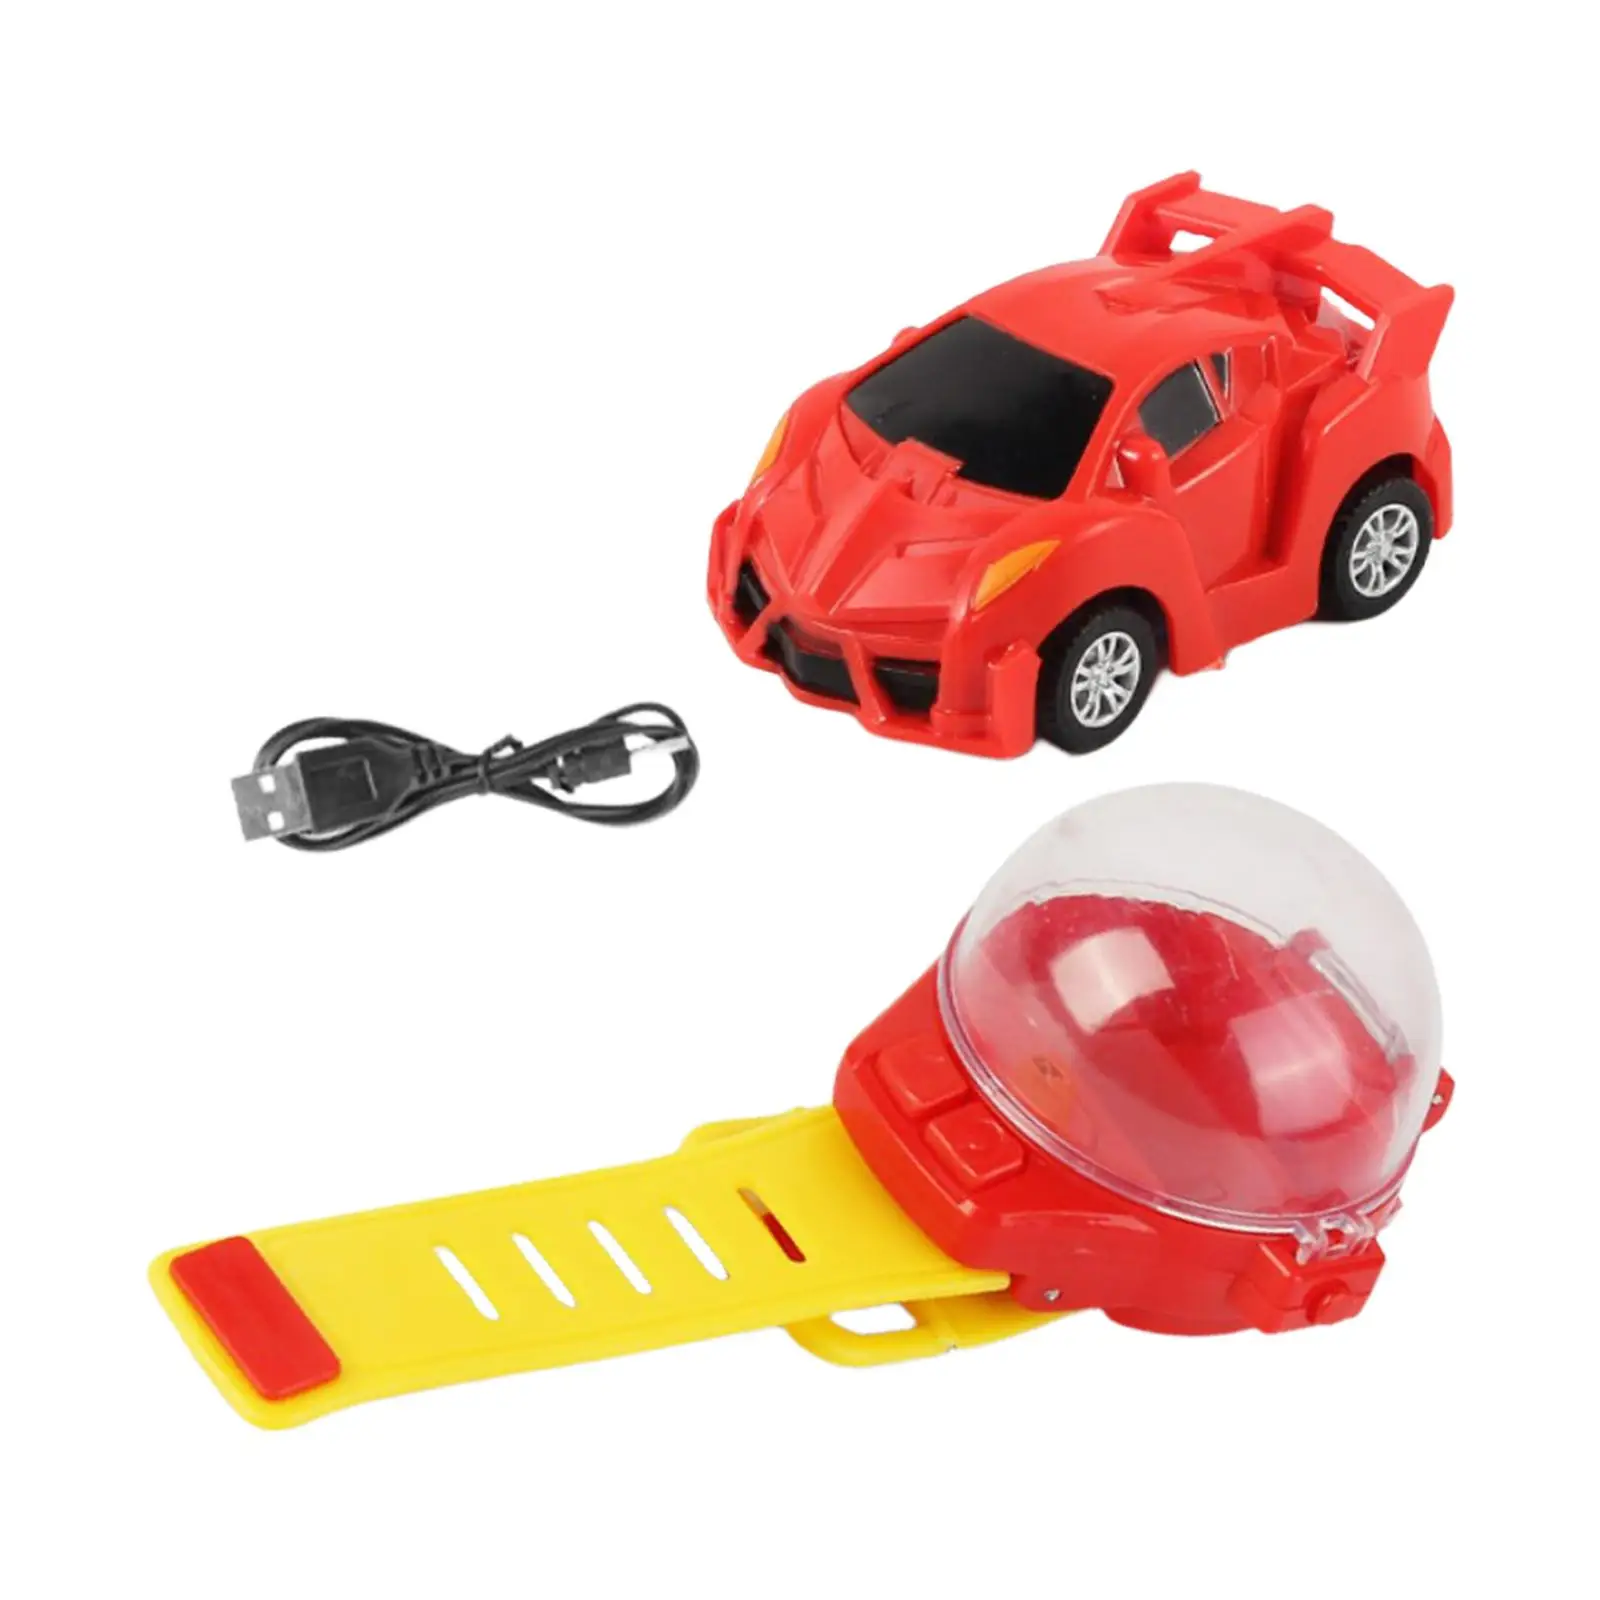 Cute Toy Children`s Watch Remote Control Toy Car Model Toy Car Birthday Present Watch Modeling Ingenious Toy